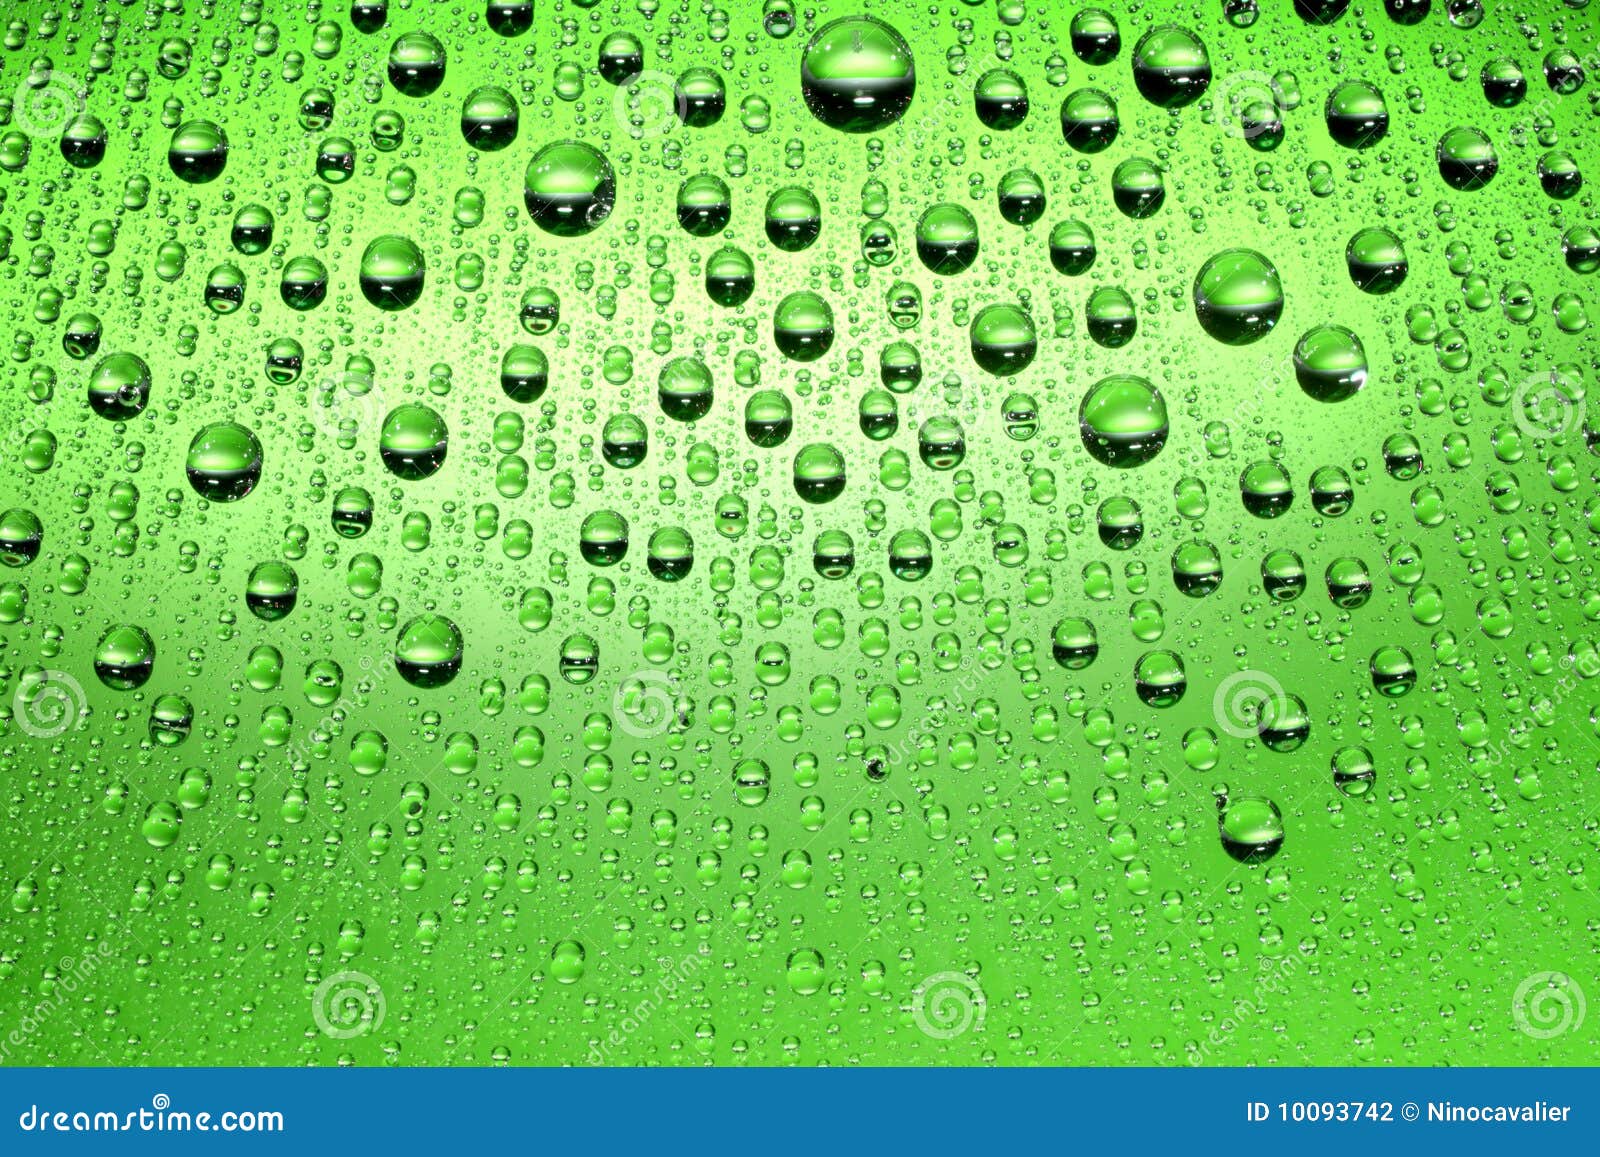 Green Water Drops Stock Photography - Image: 10093742